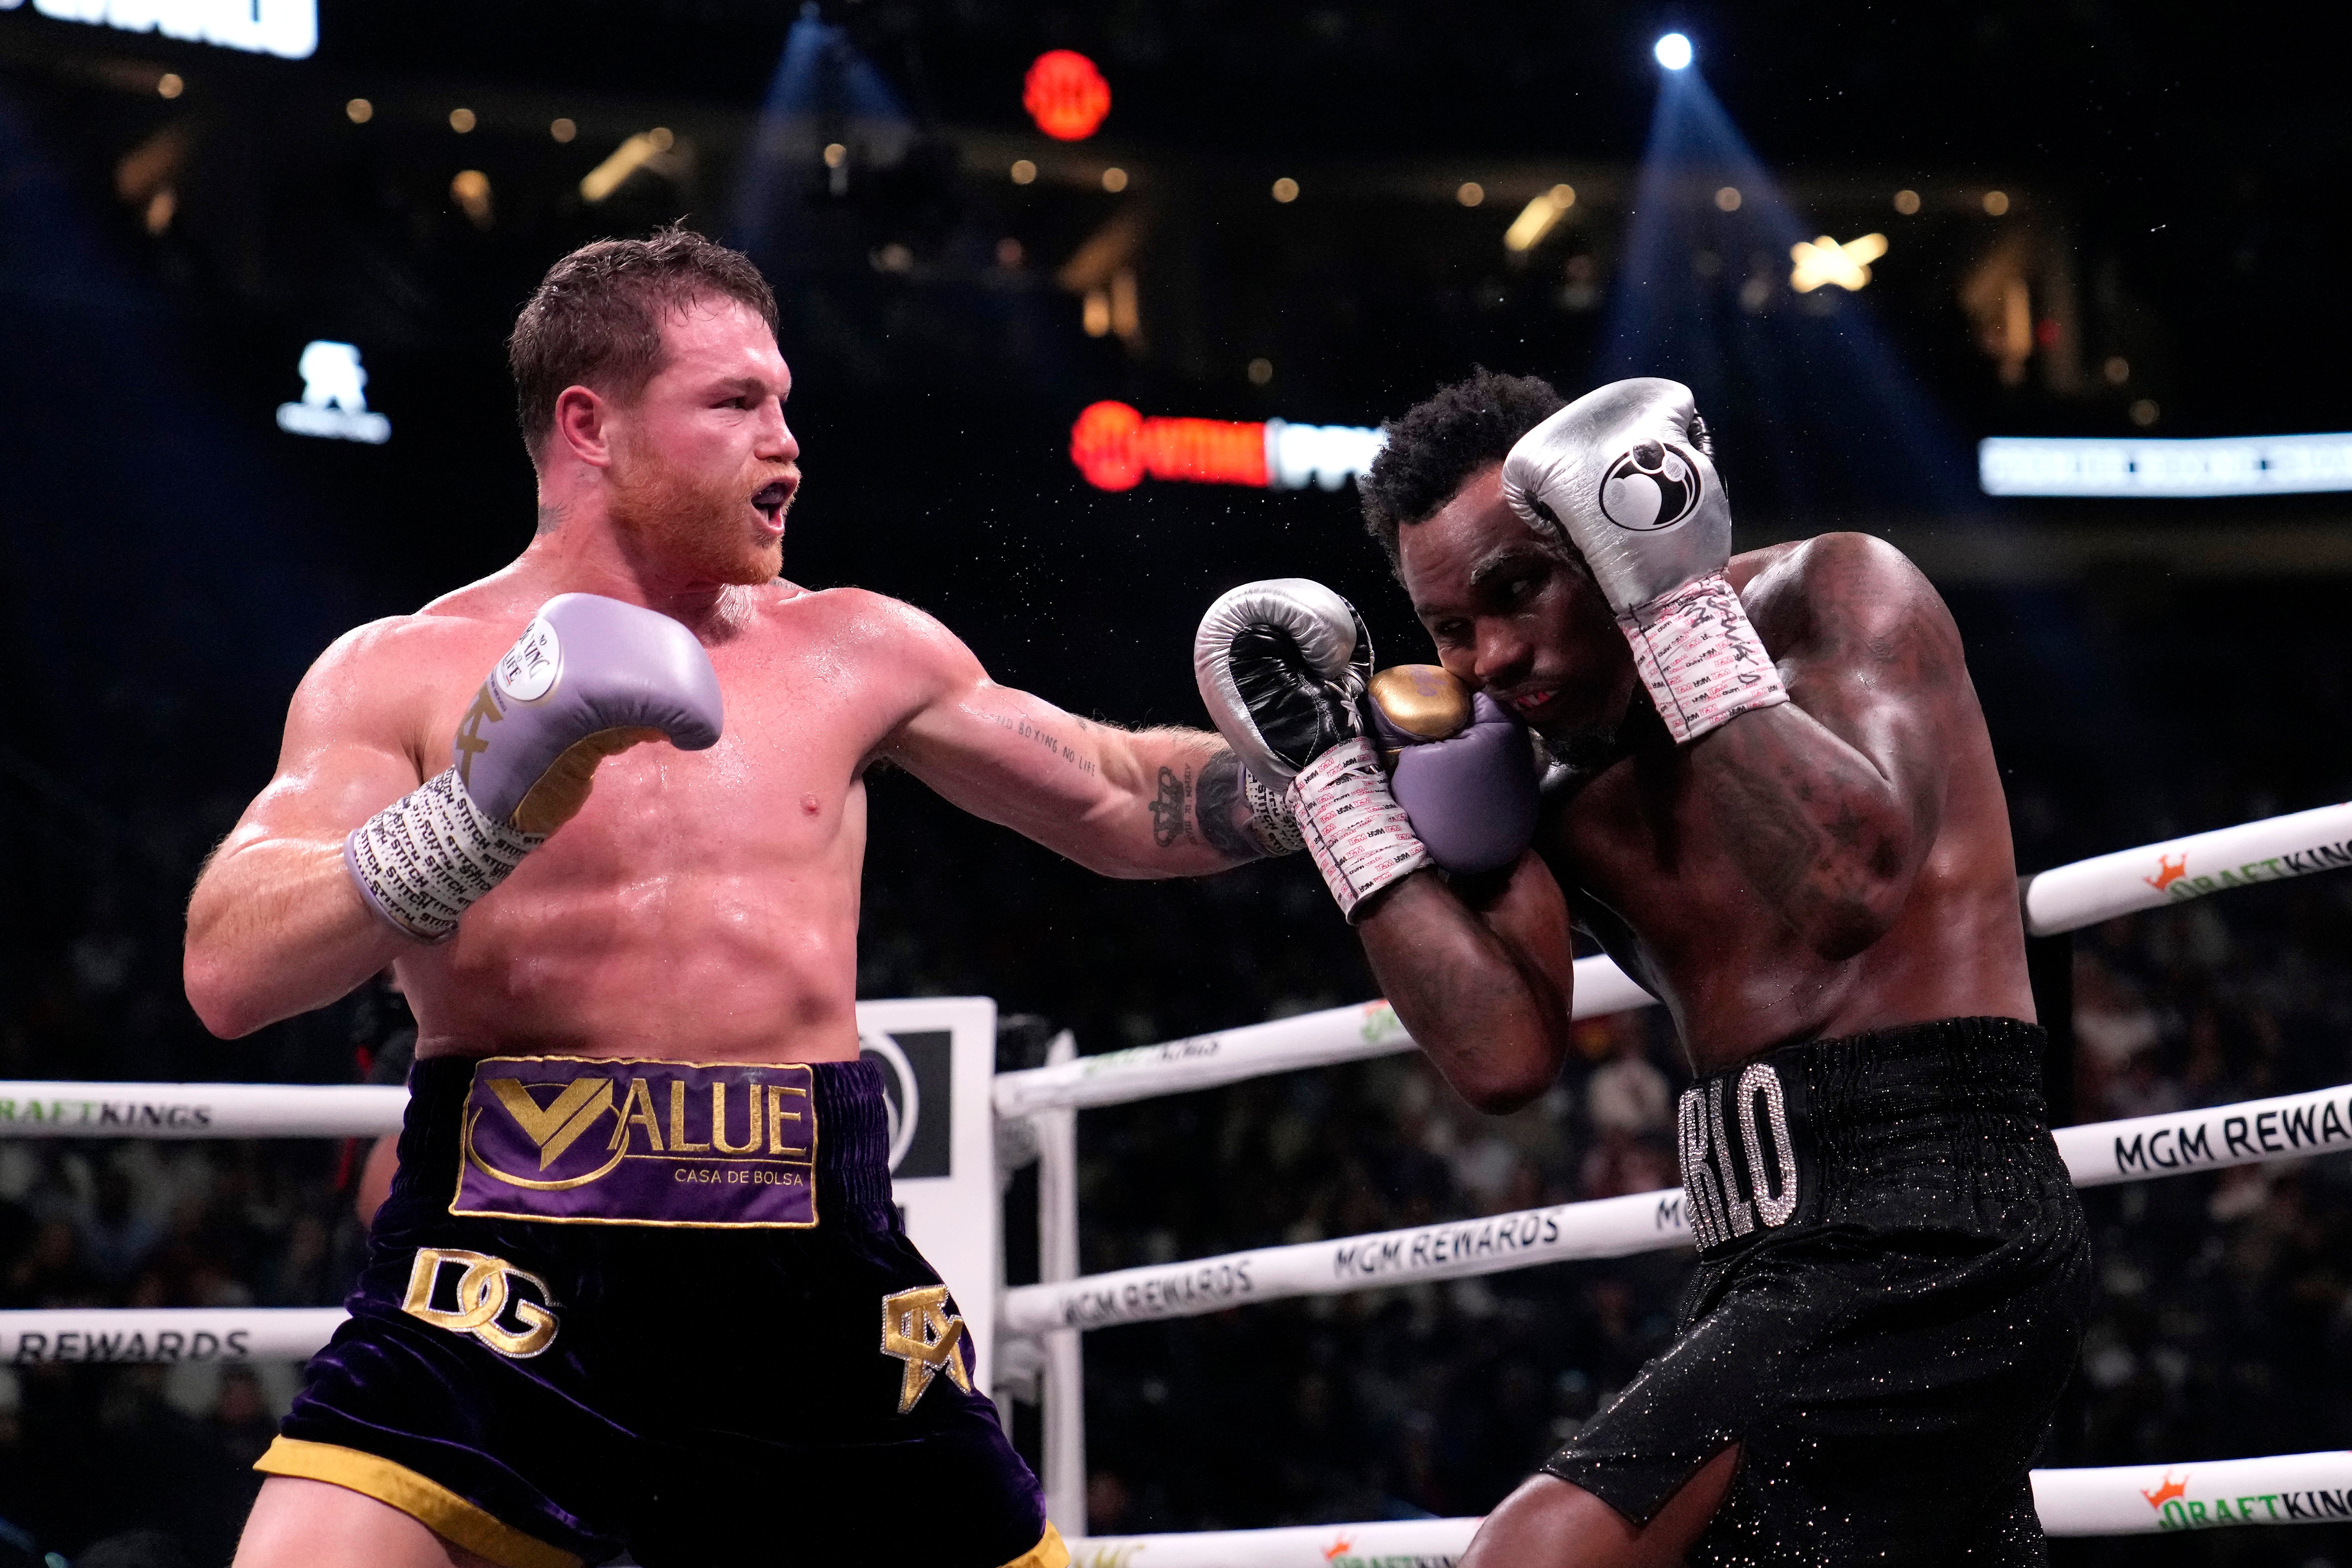 Canelo retained his undisputed super-middleweight titles for the third time – a record